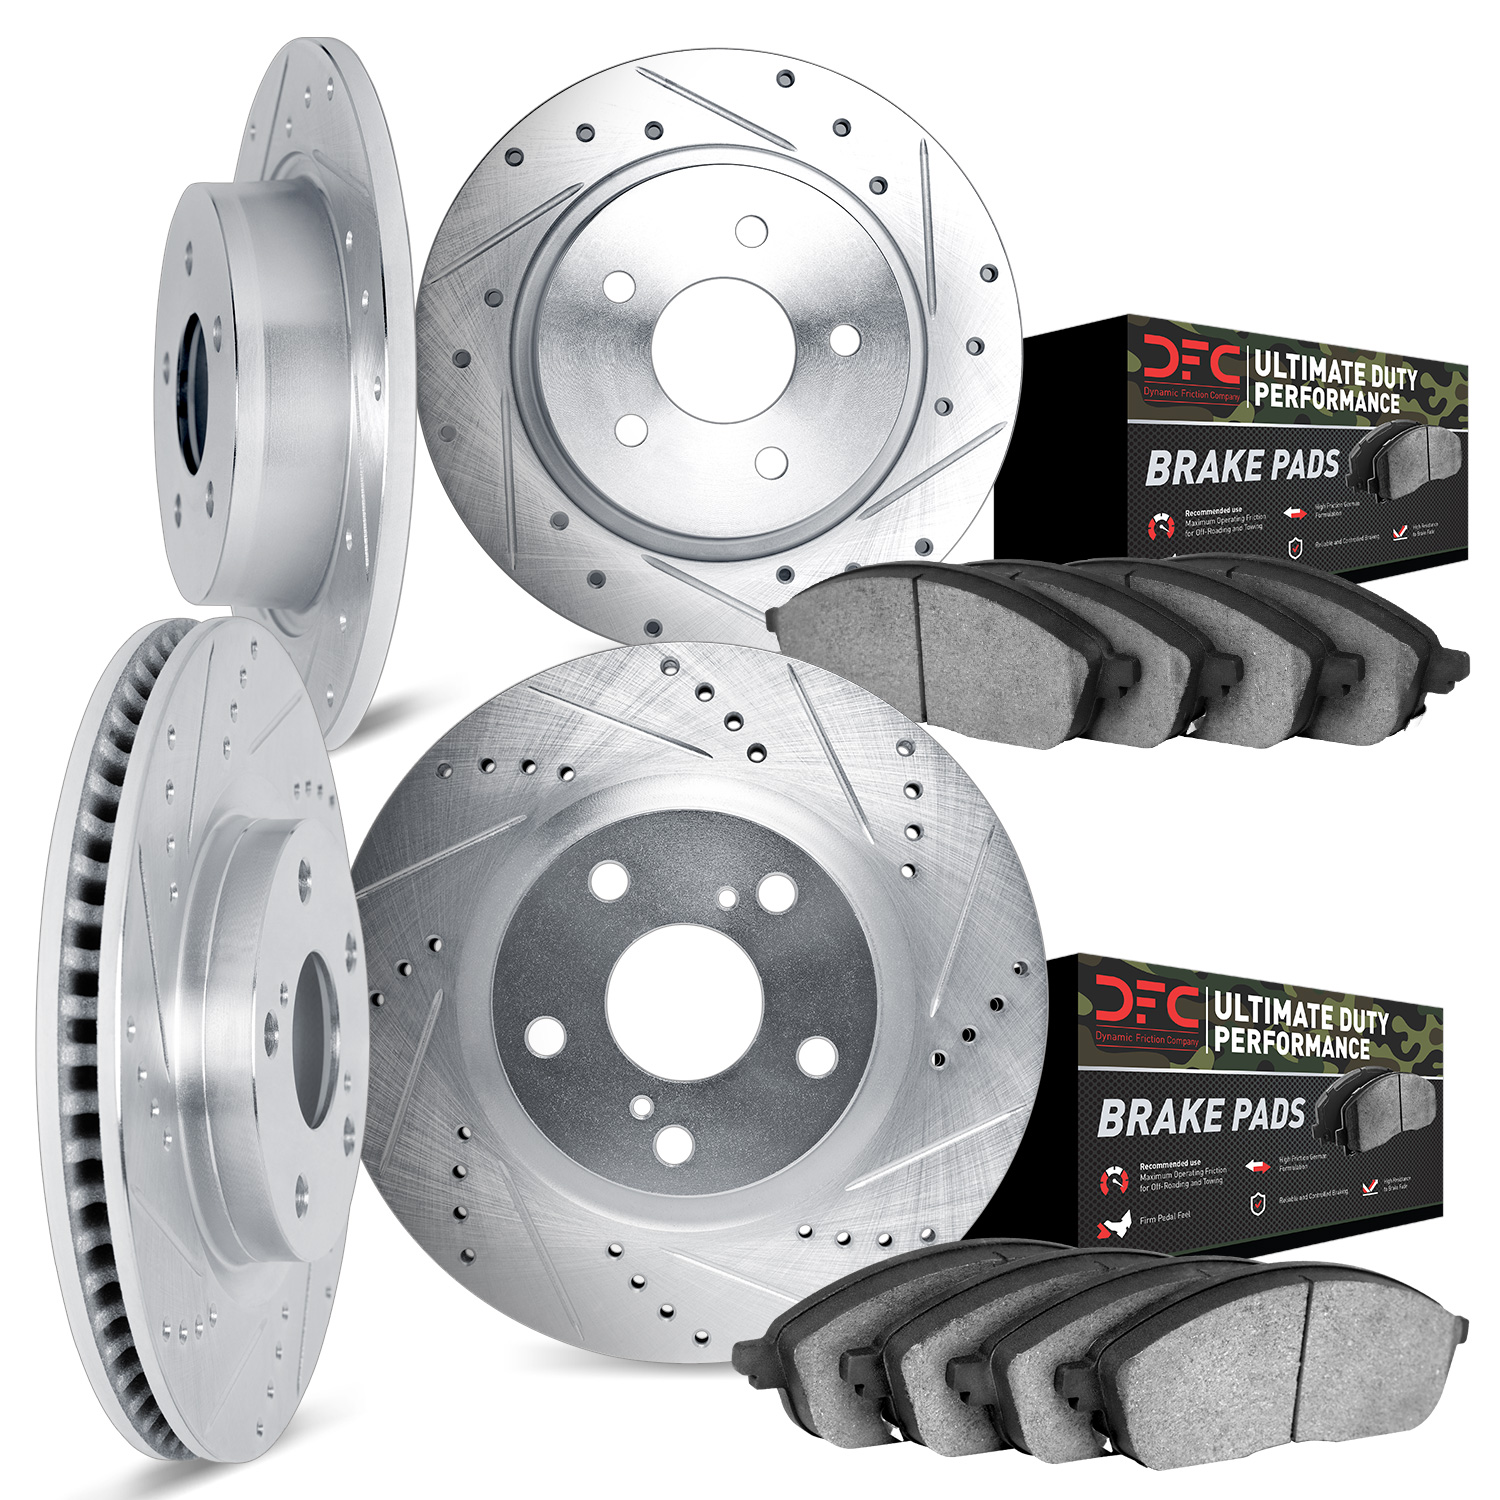 7404-54025 Drilled/Slotted Brake Rotors with Ultimate-Duty Brake Pads Kit [Silver], 1999-2004 Ford/Lincoln/Mercury/Mazda, Positi